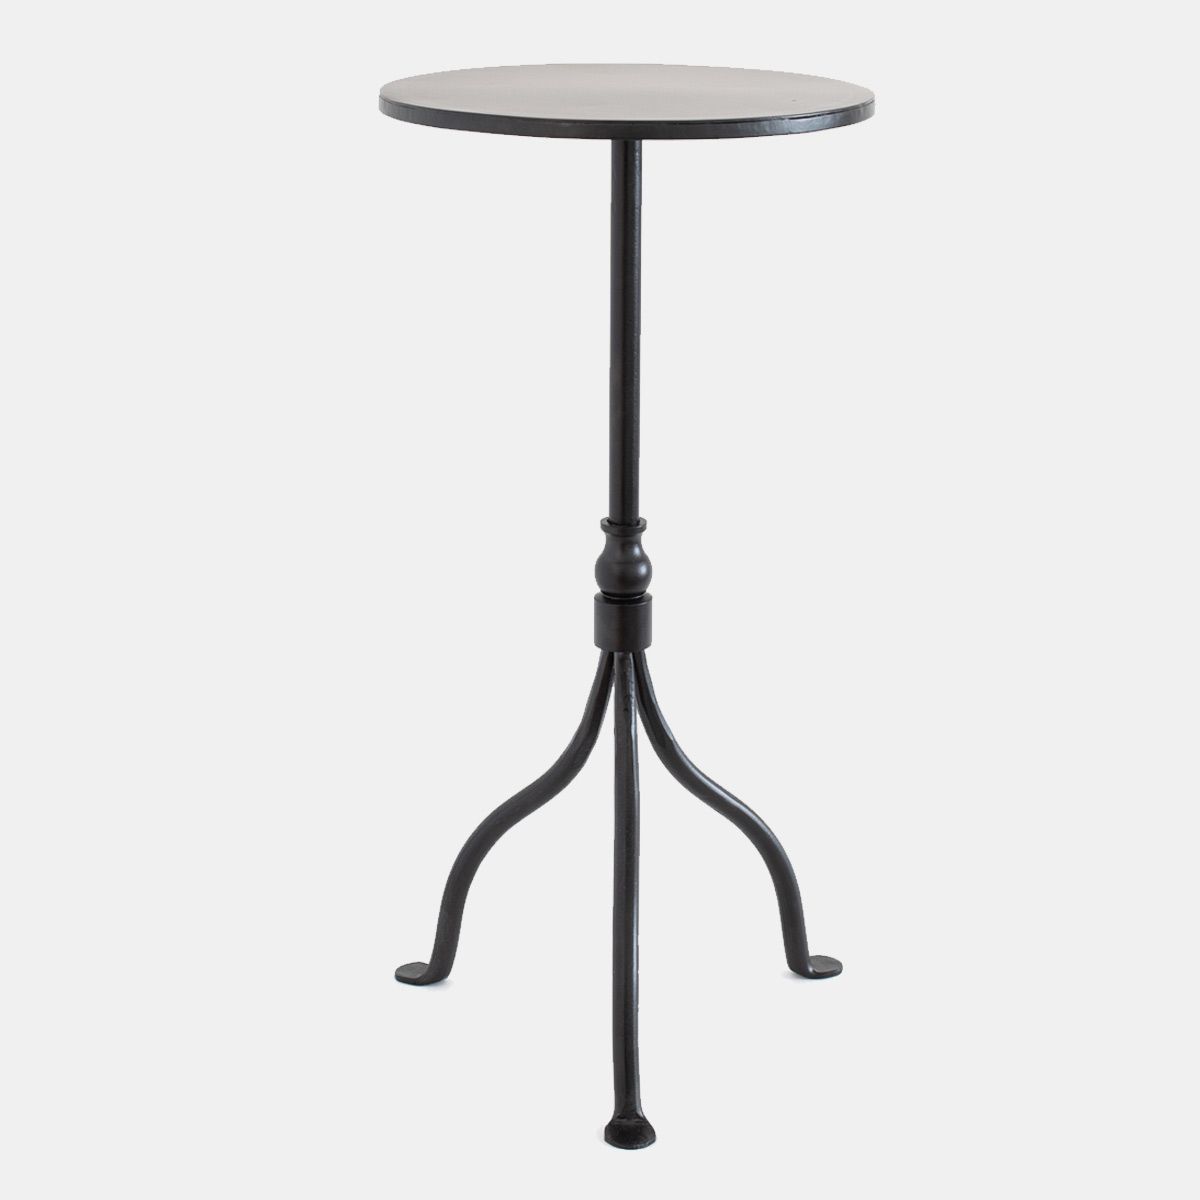 Iron Pedestal Table – Black | The Vintage Rug Shop Pertaining To Black Iron Outdoor Accent Tables (View 7 of 15)